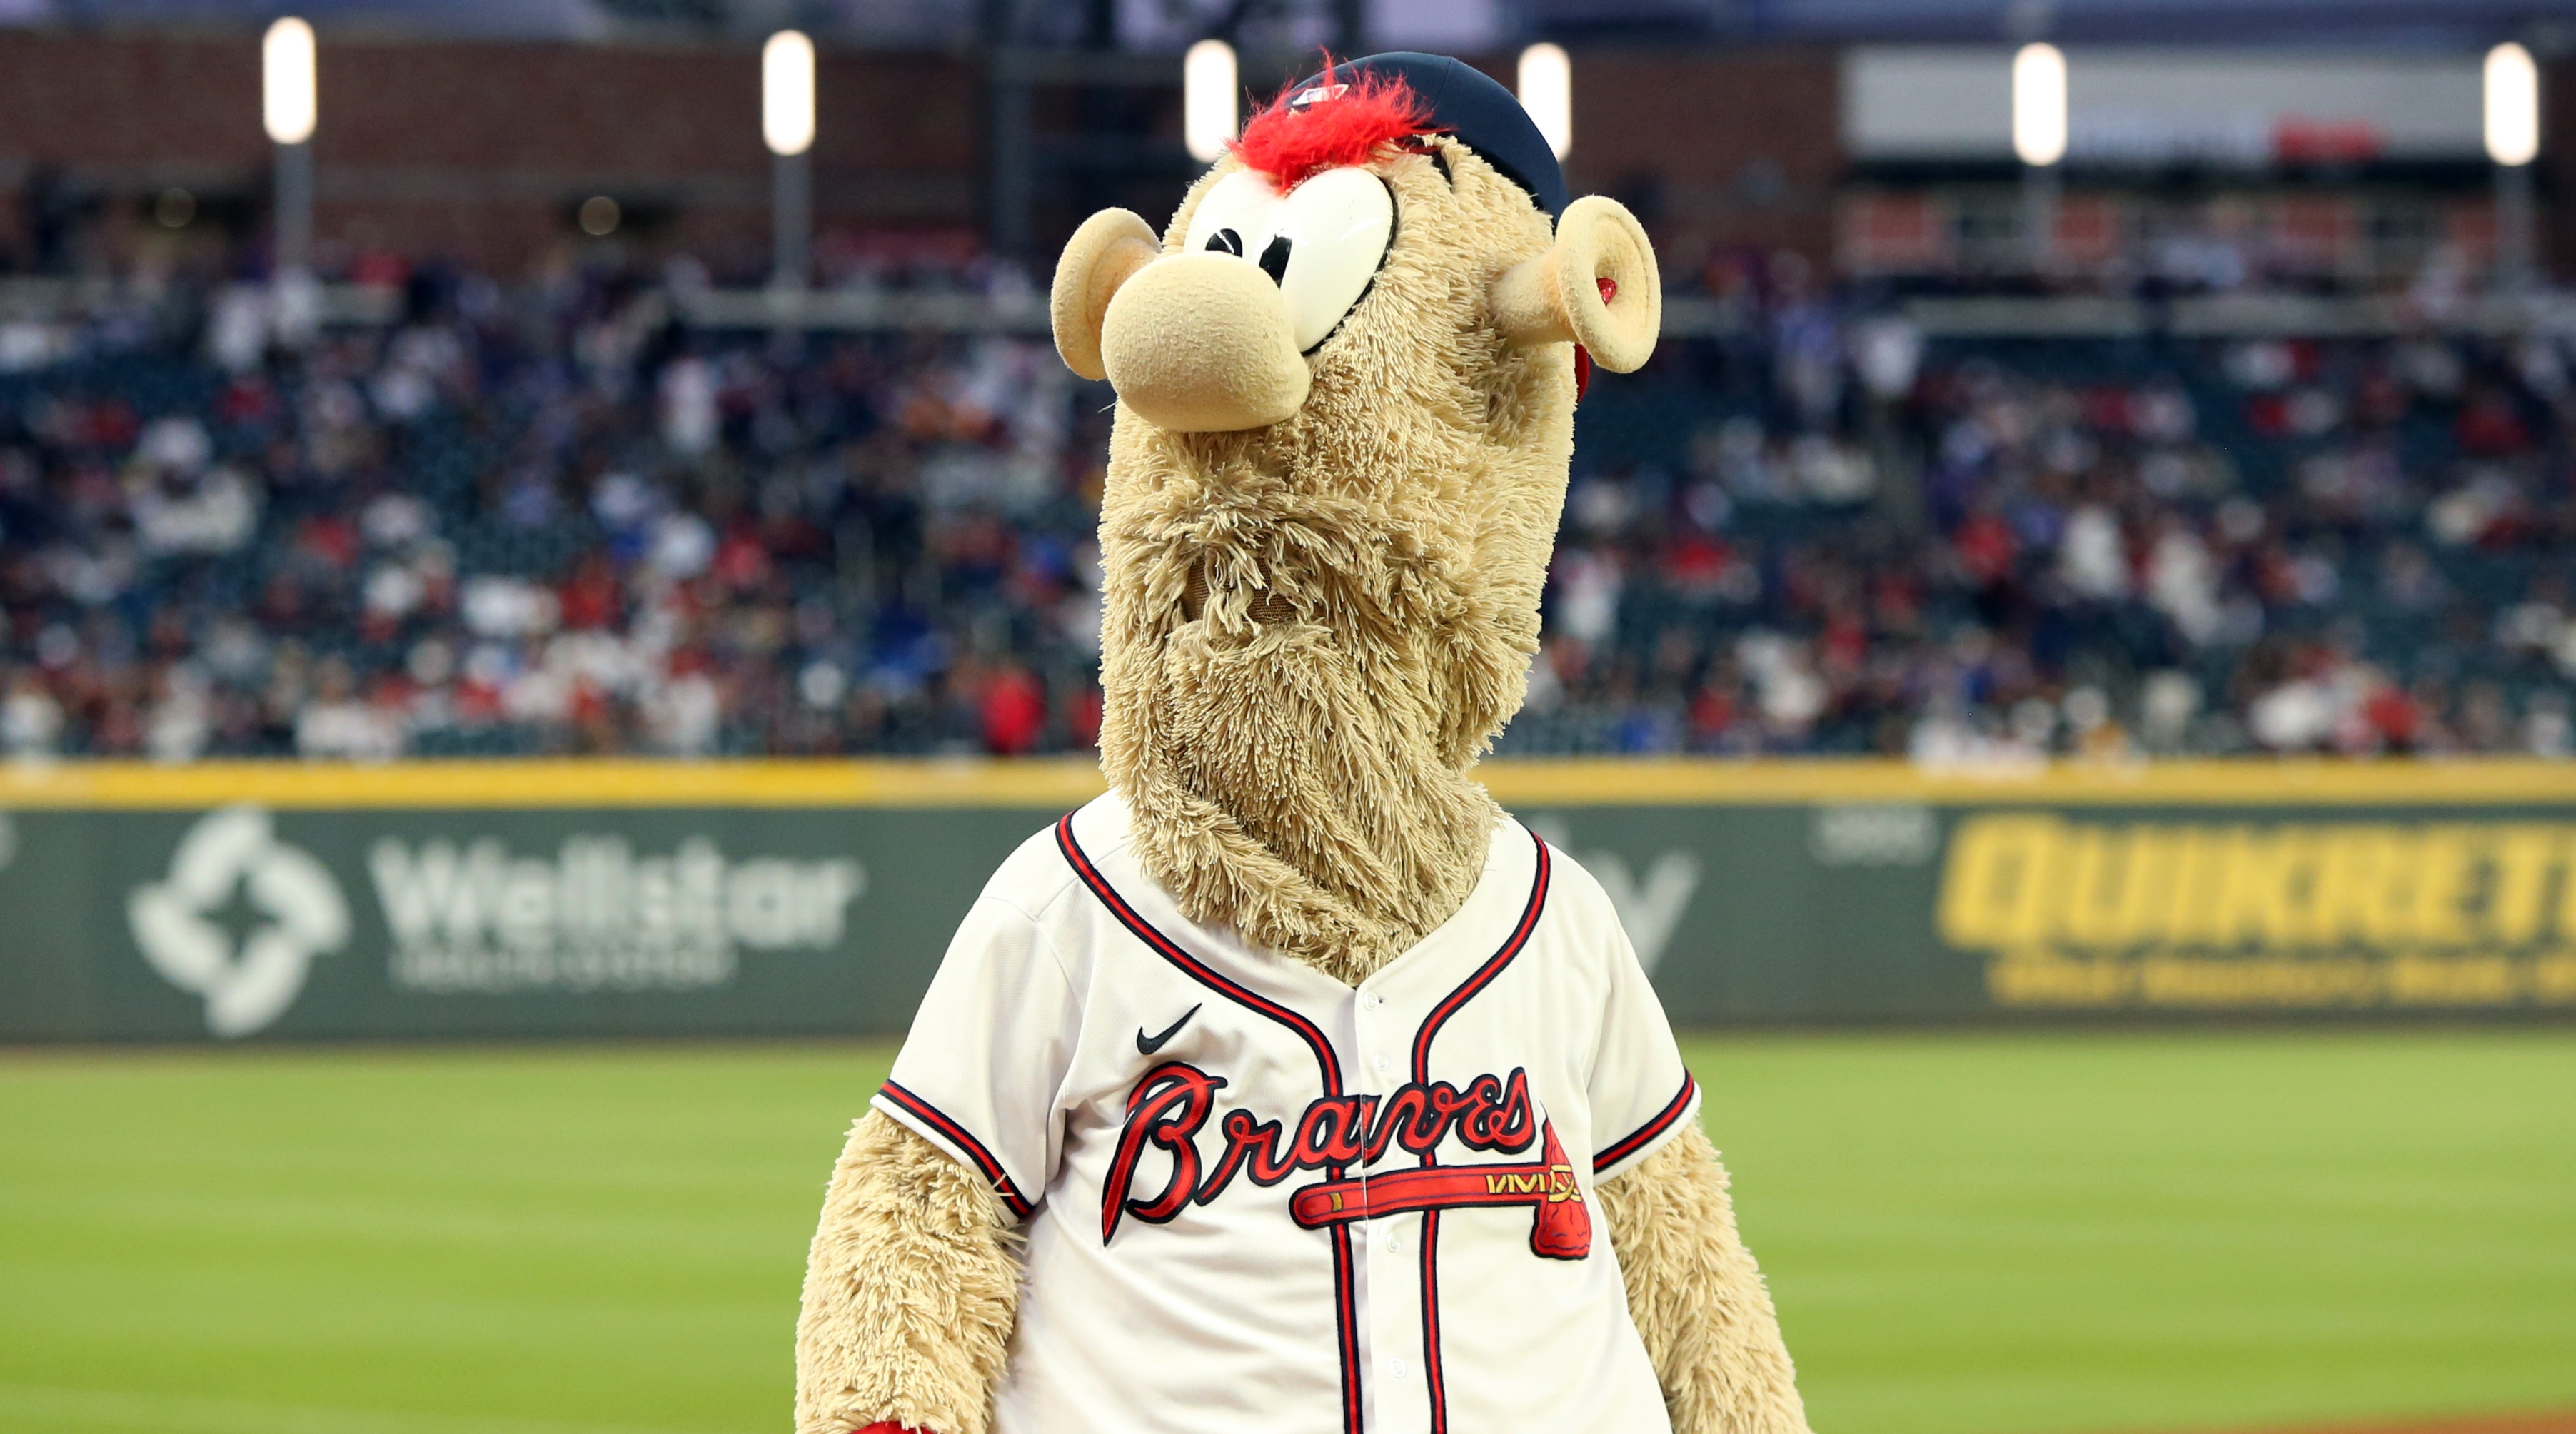 Braves mascot Blooper fails in trying to jump through tables